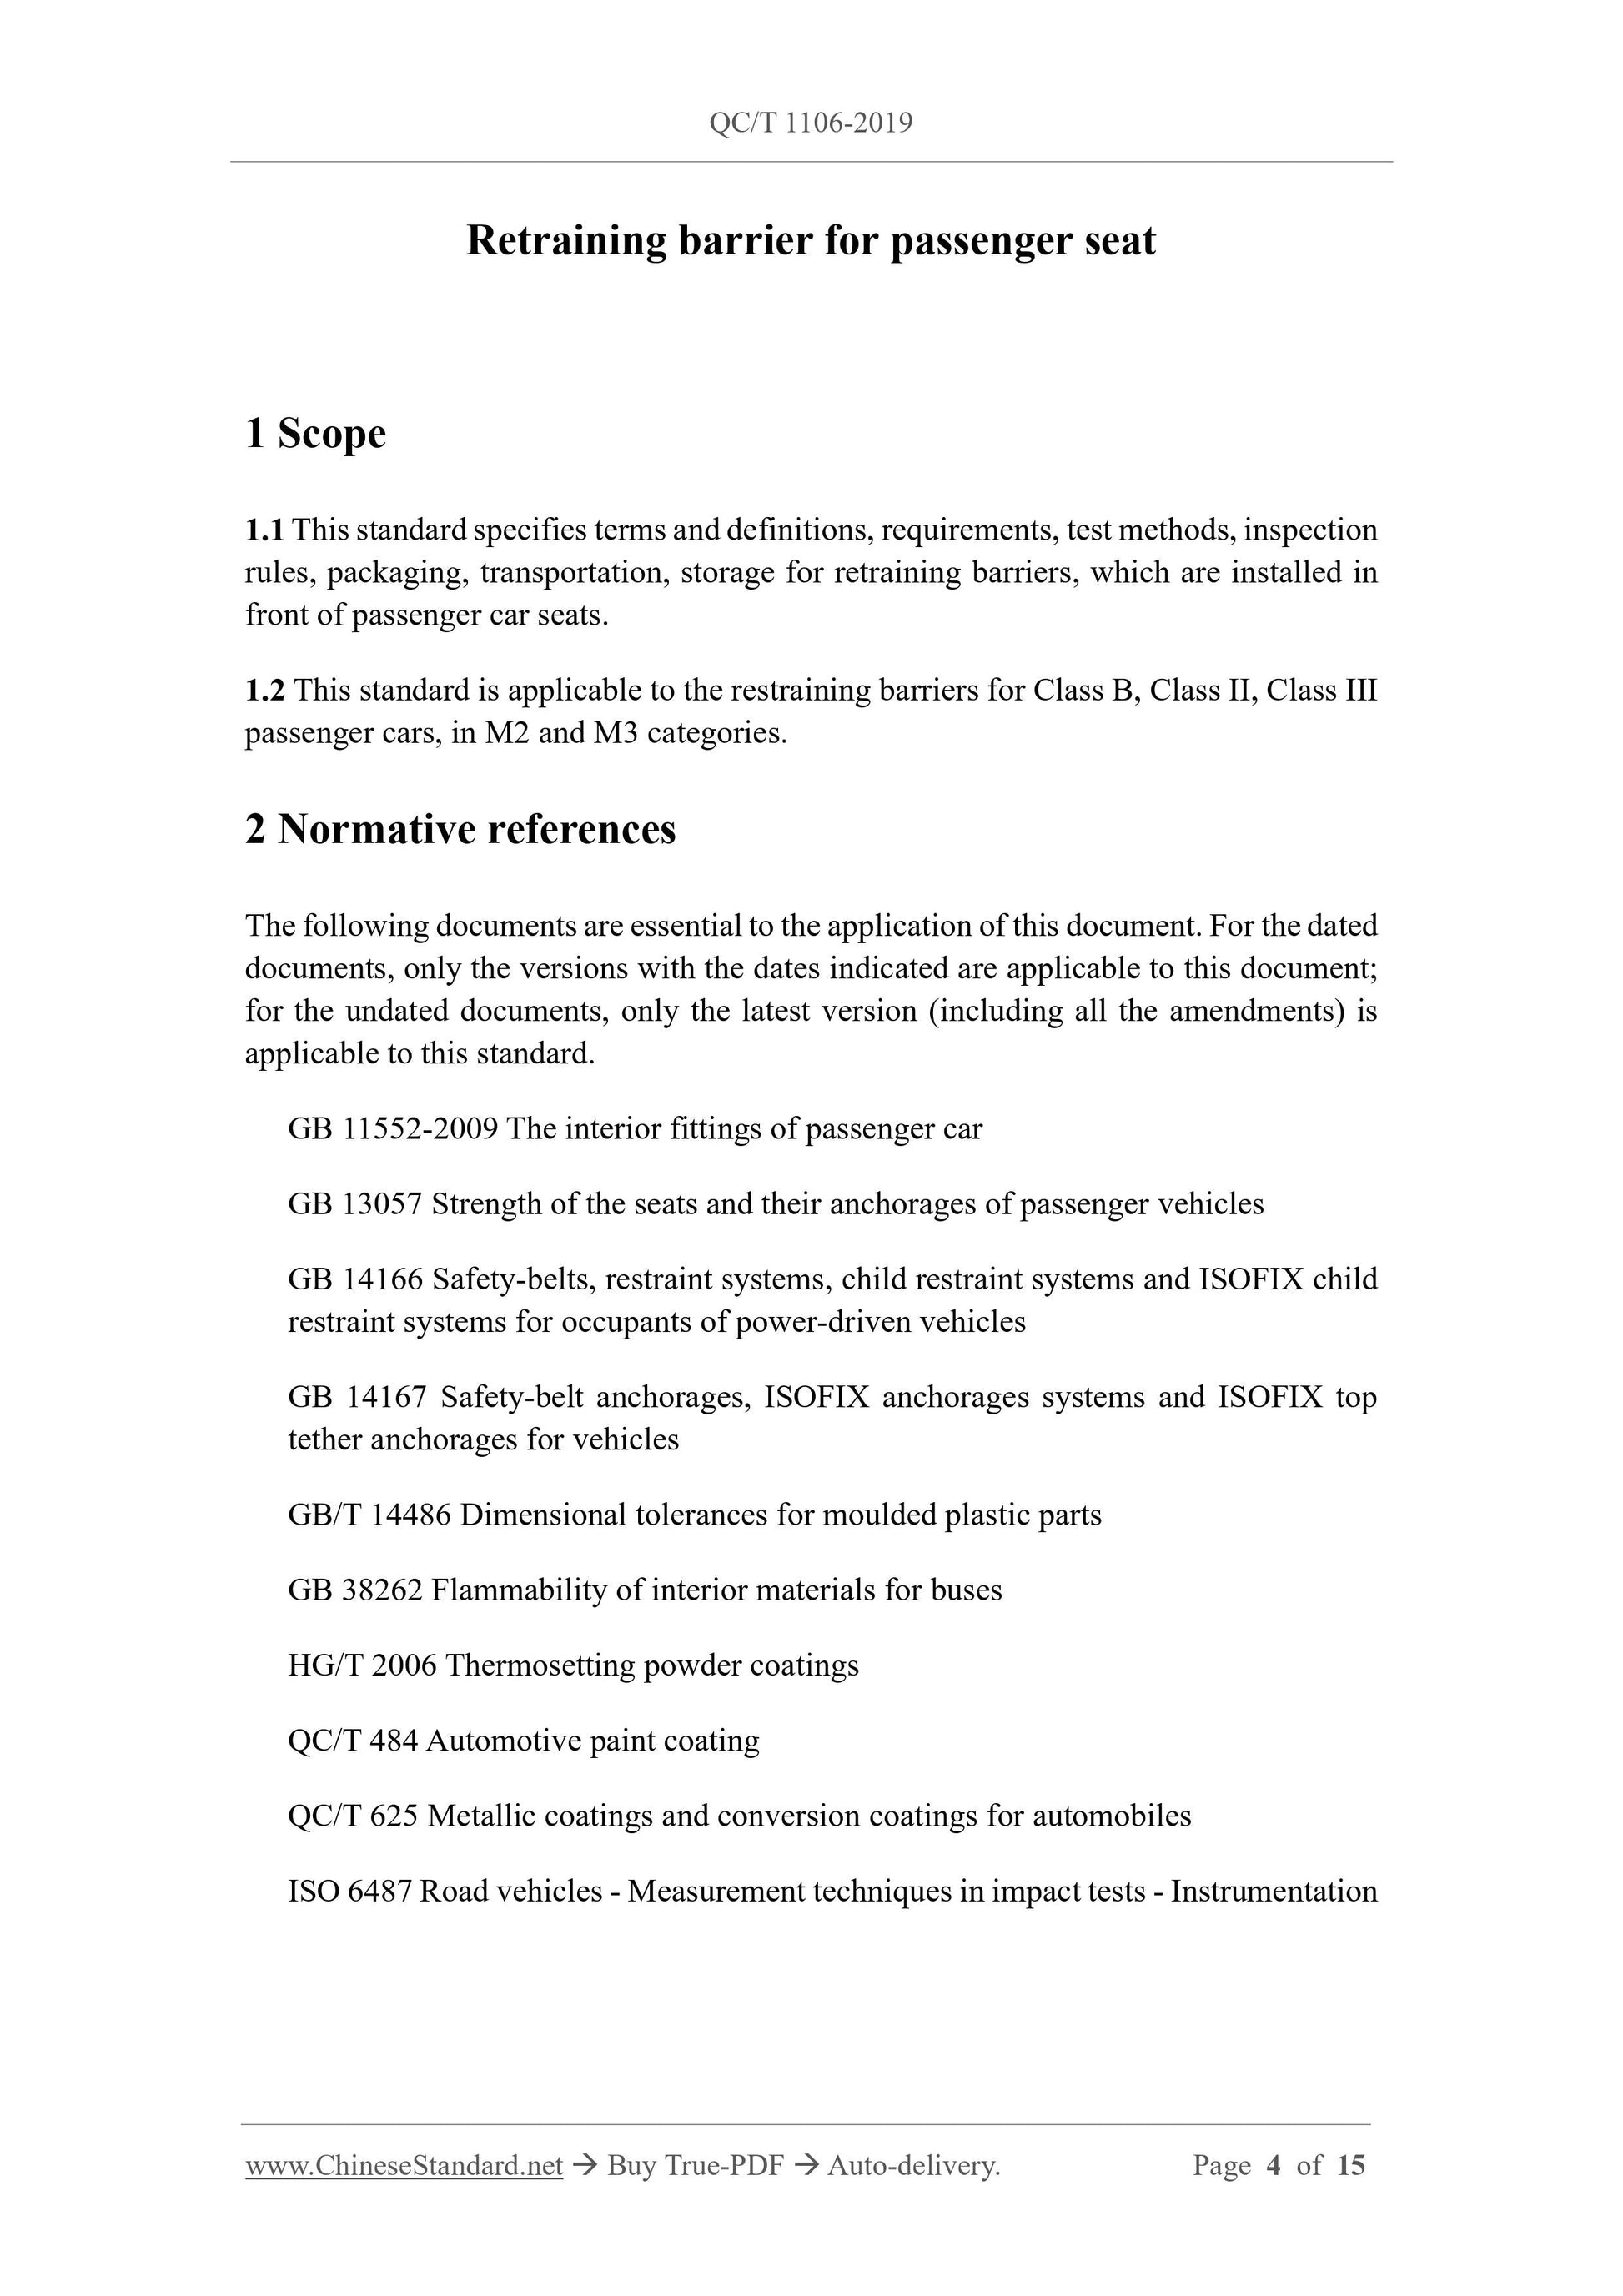 QC/T 1106-2019 Page 4